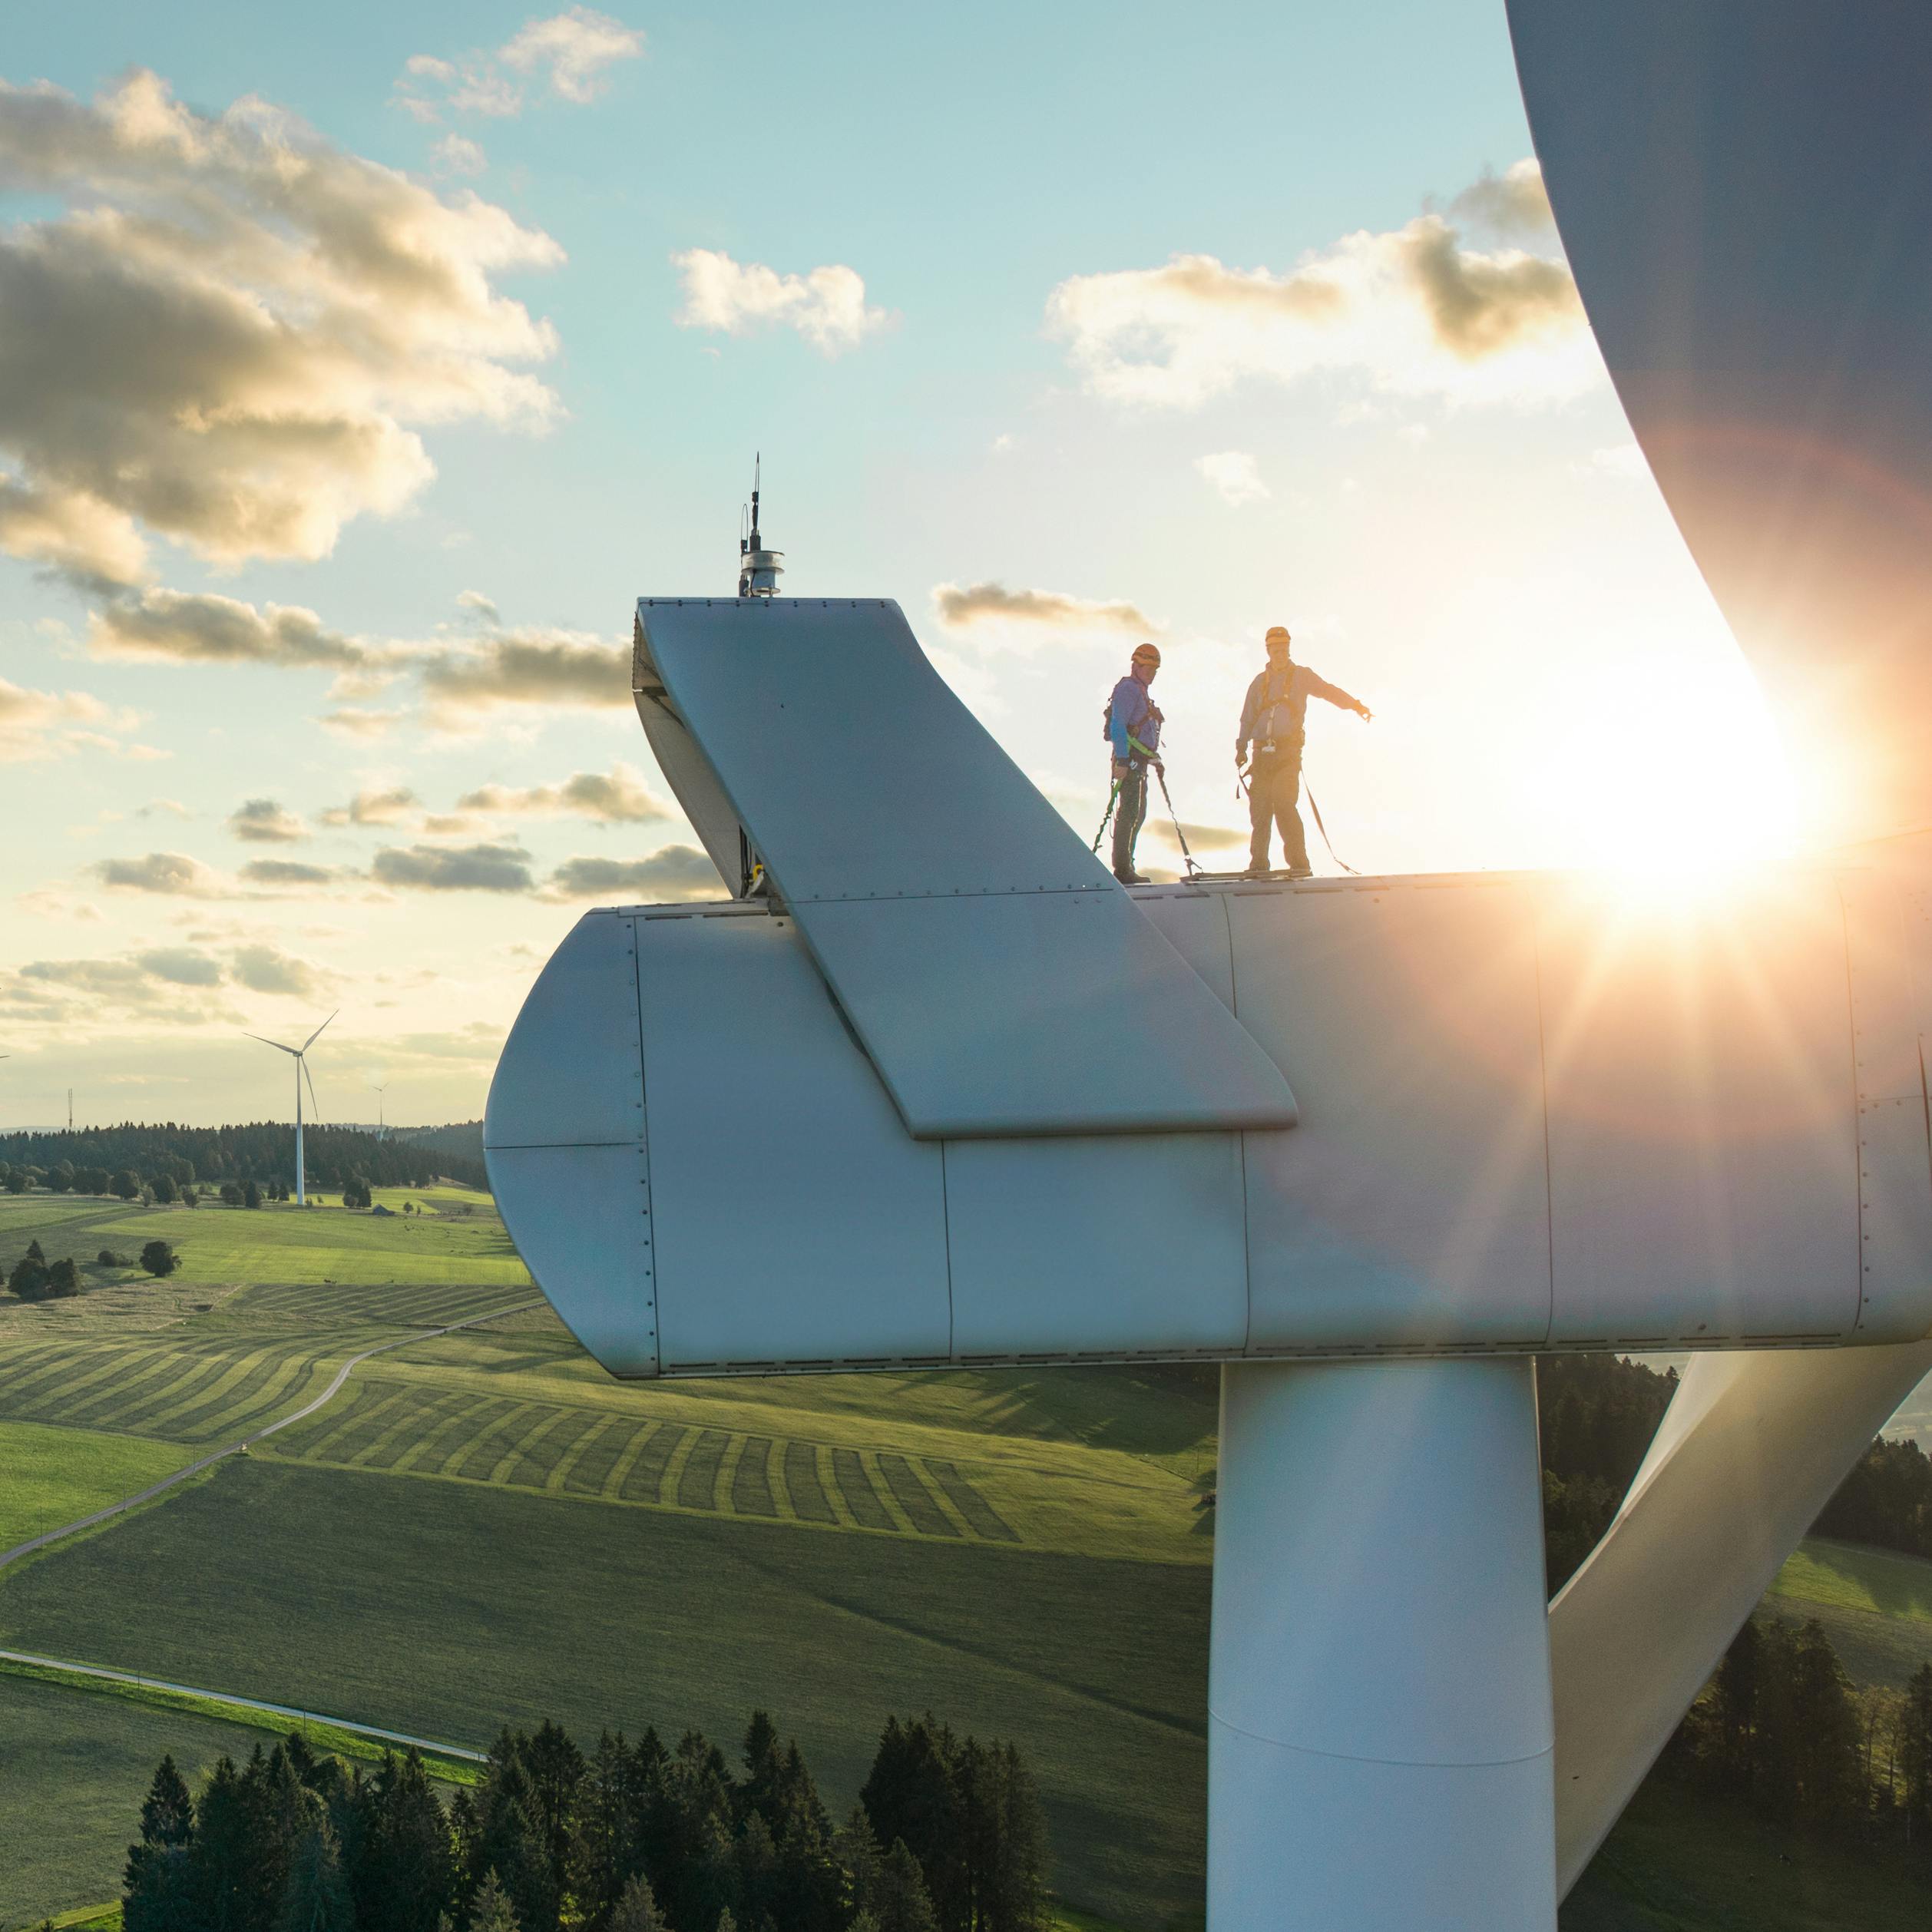 Two people standing on top of a wind turbine, green landscape.